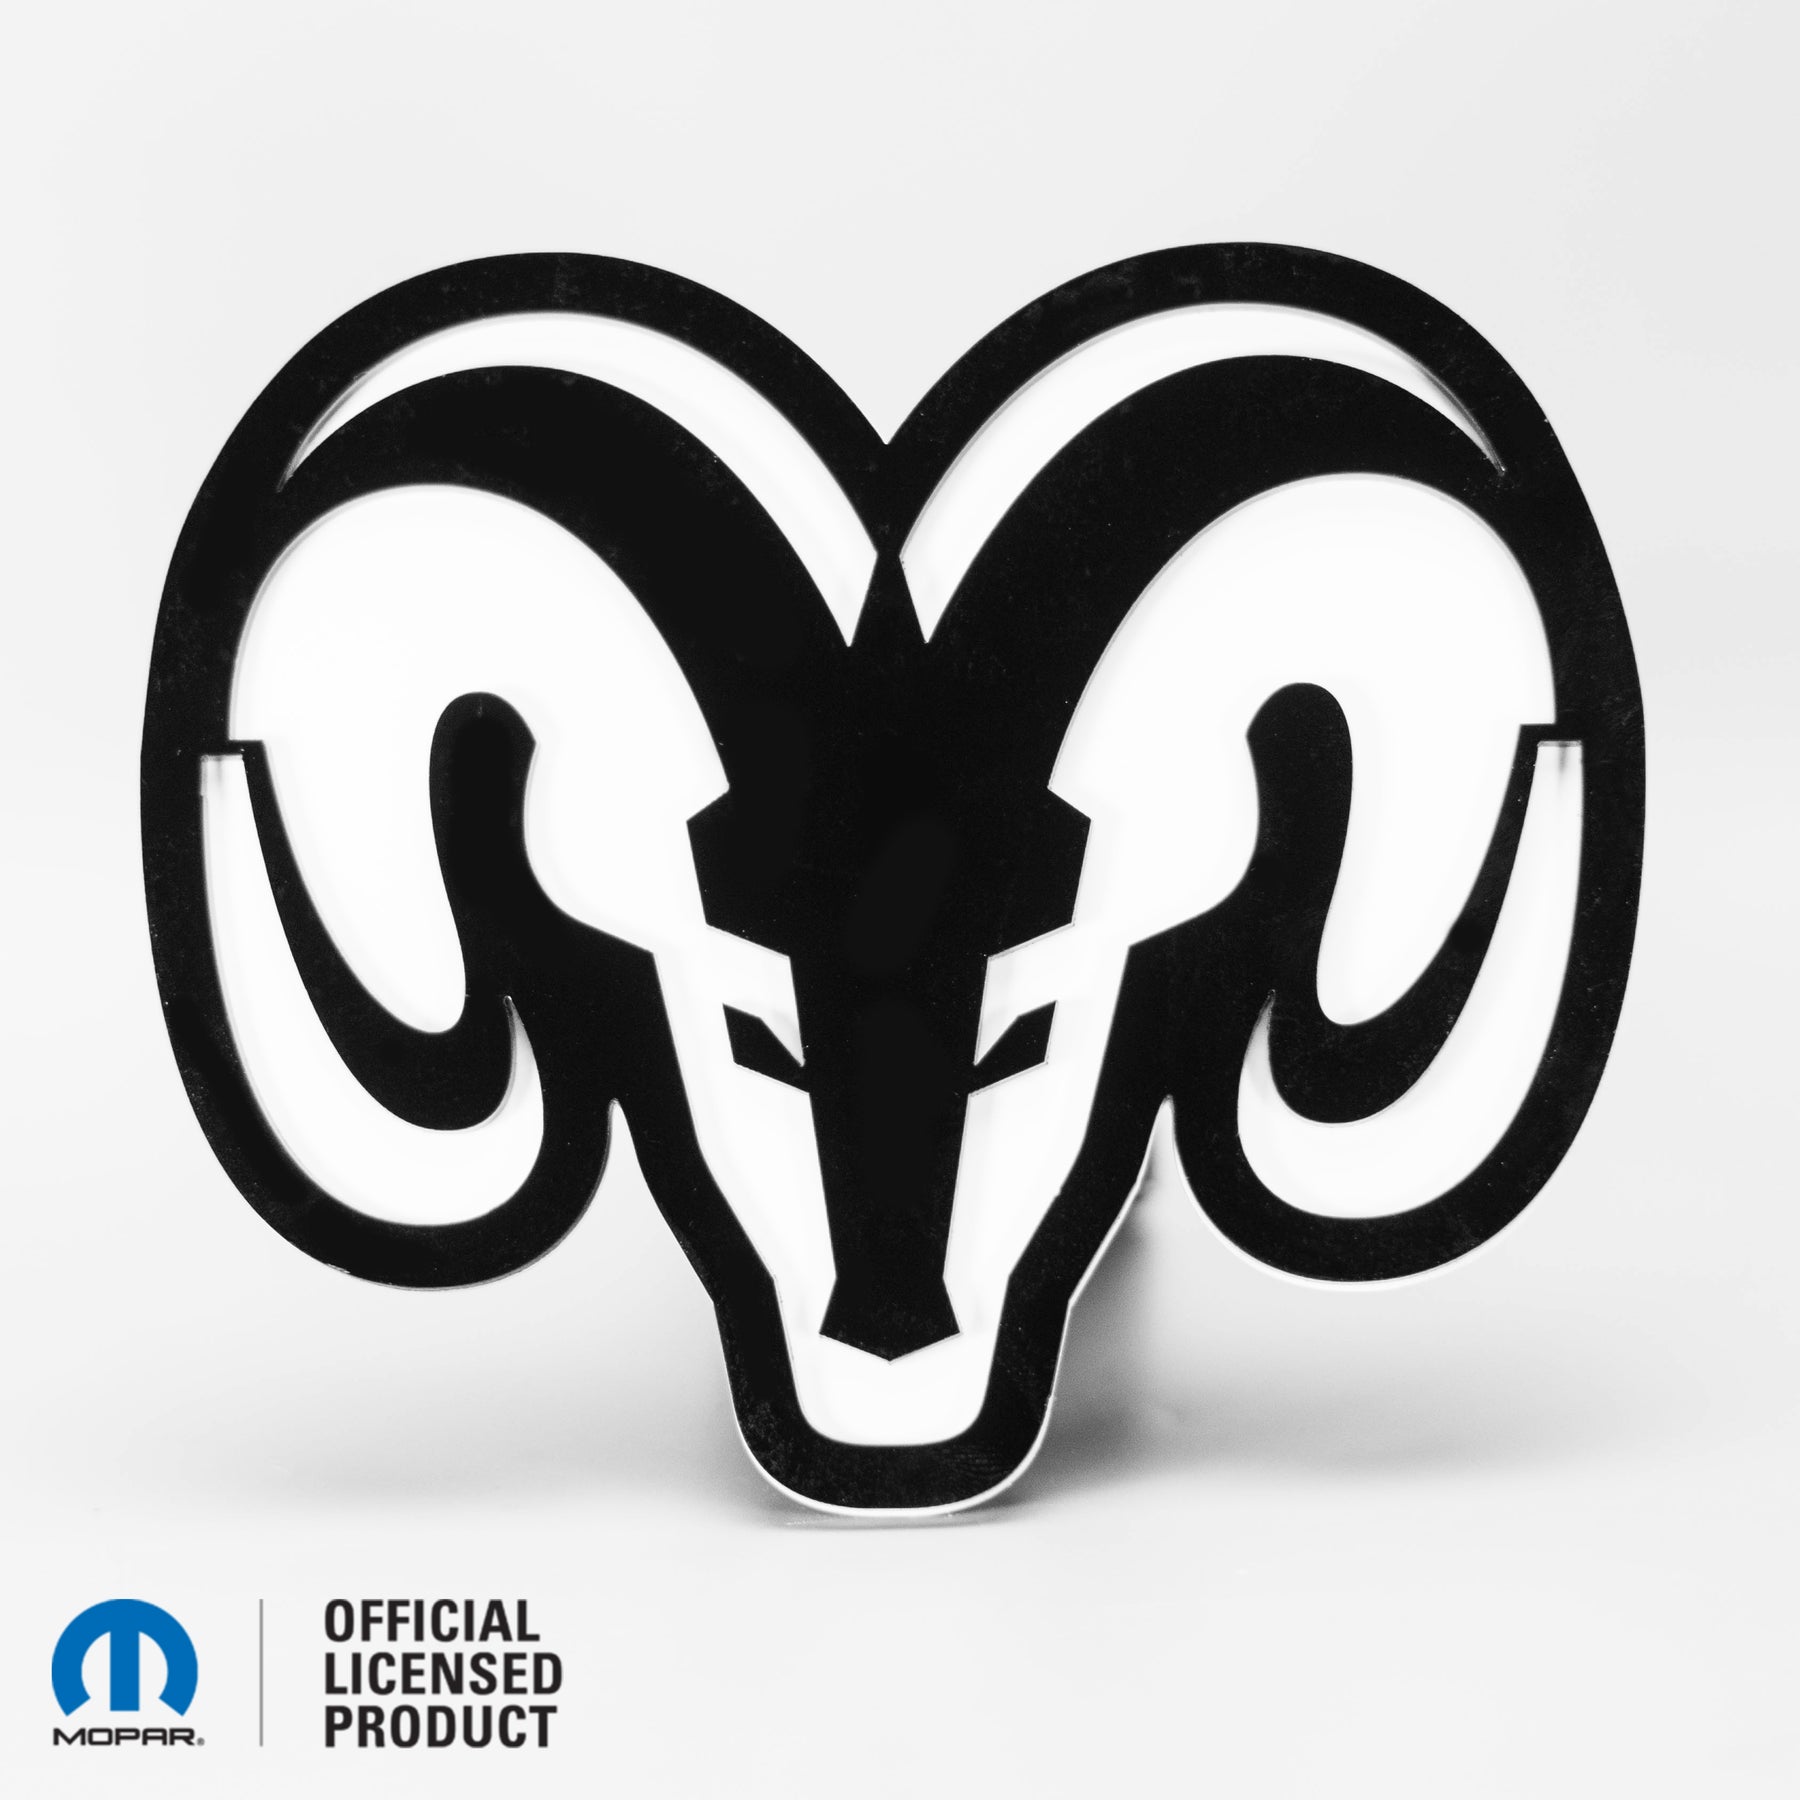 RAM® HEAD LOGO STYLE 1 - HITCH COVER - Gloss on White - Officially Licensed Product